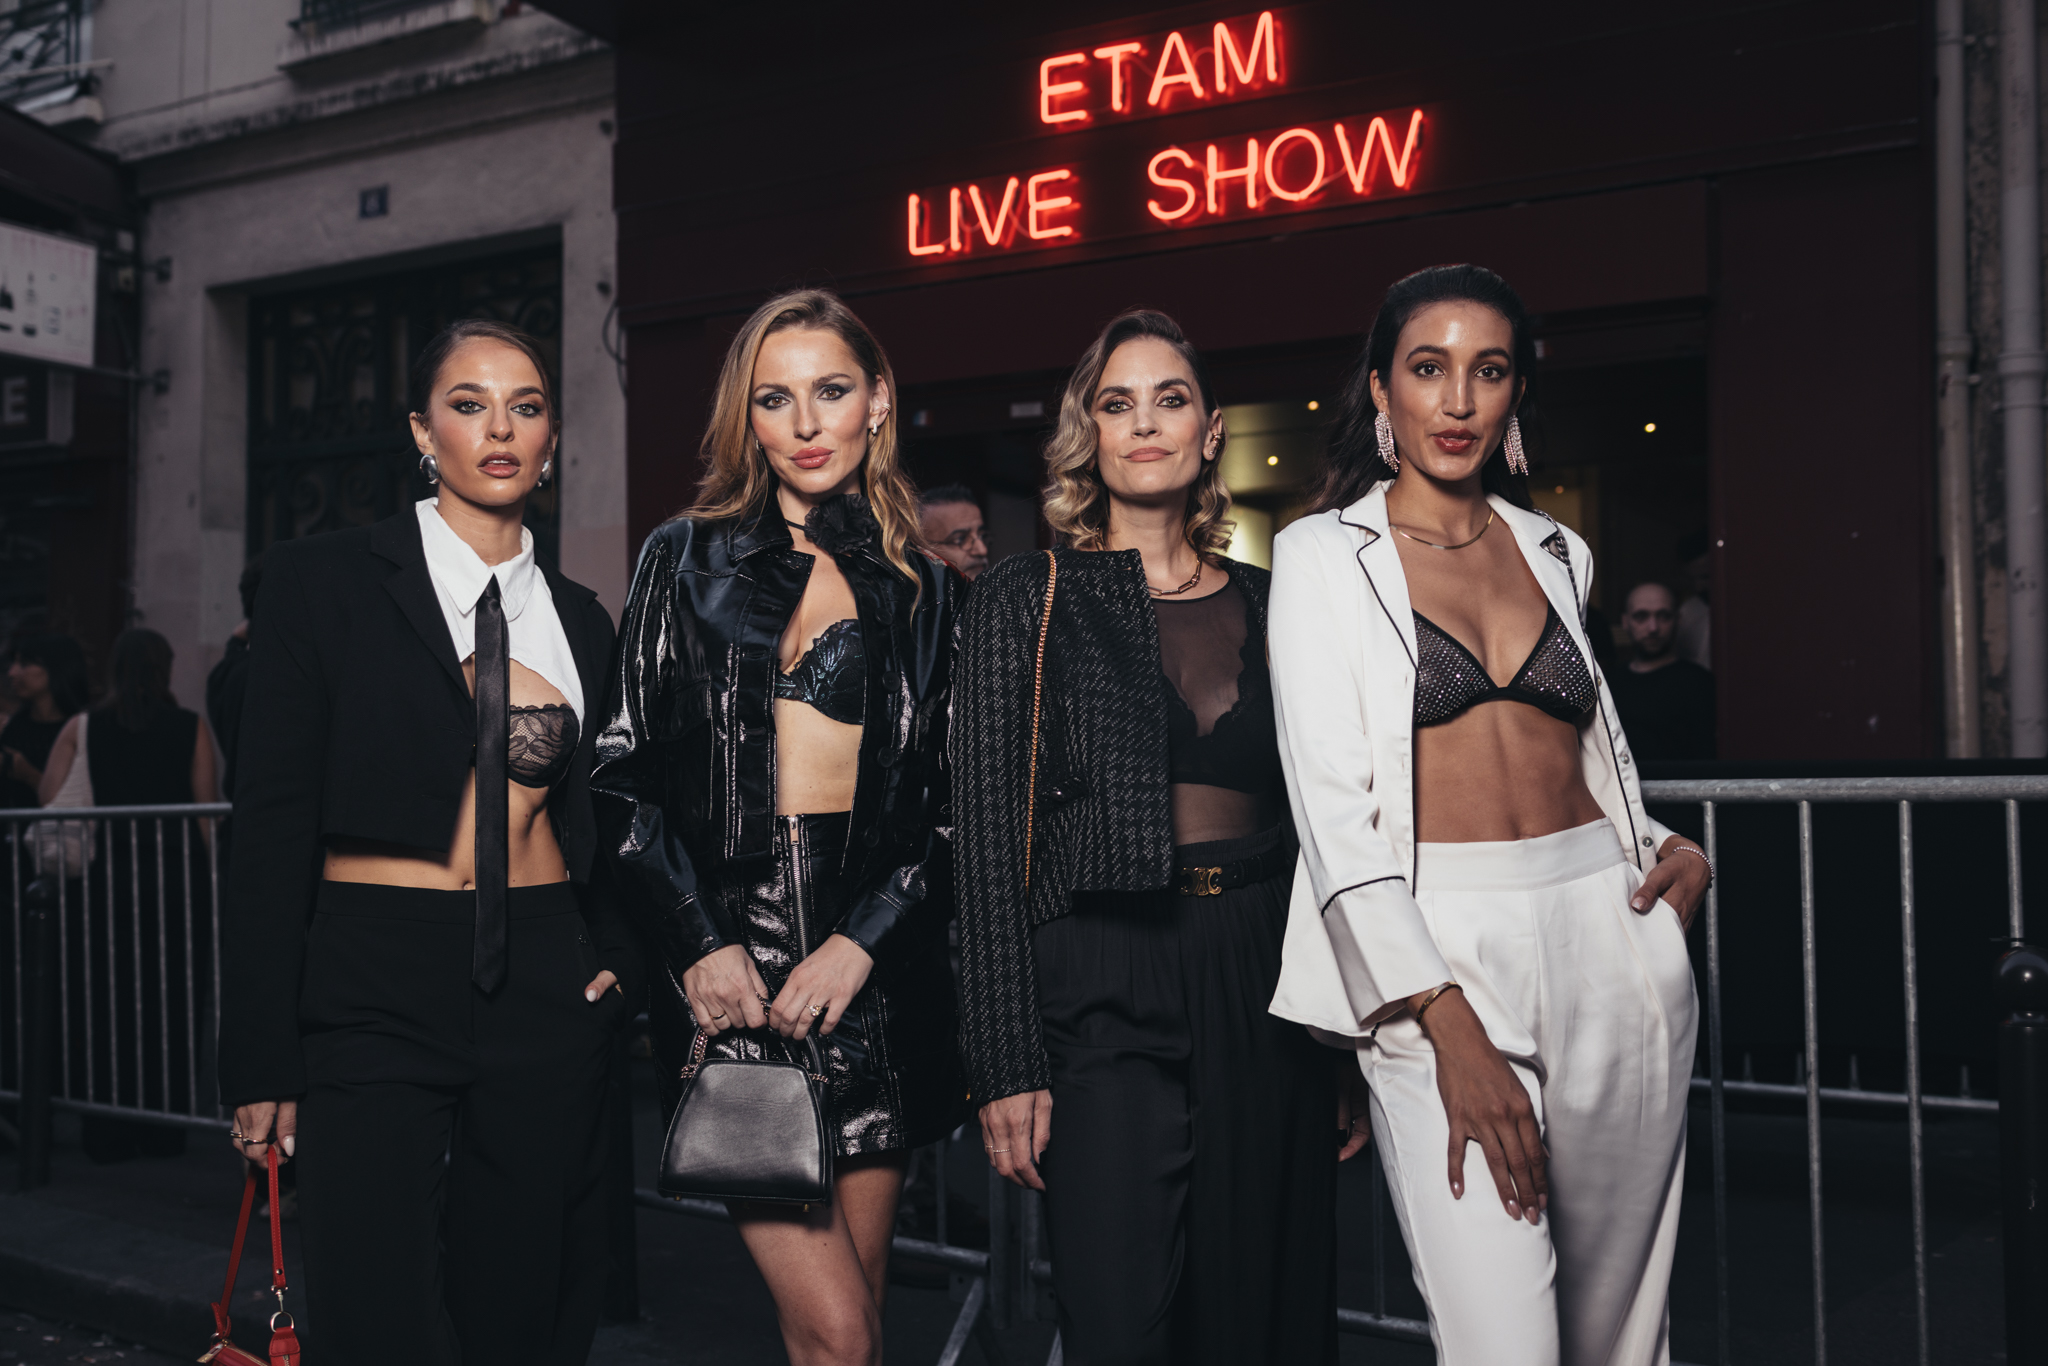 Etam's 80s-Inspired Extravaganza: A Dazzling Etam Live Show 2023 in Paris during PFW. Insights from the trip to Paris with the Swiss Ambassadors Team. 19